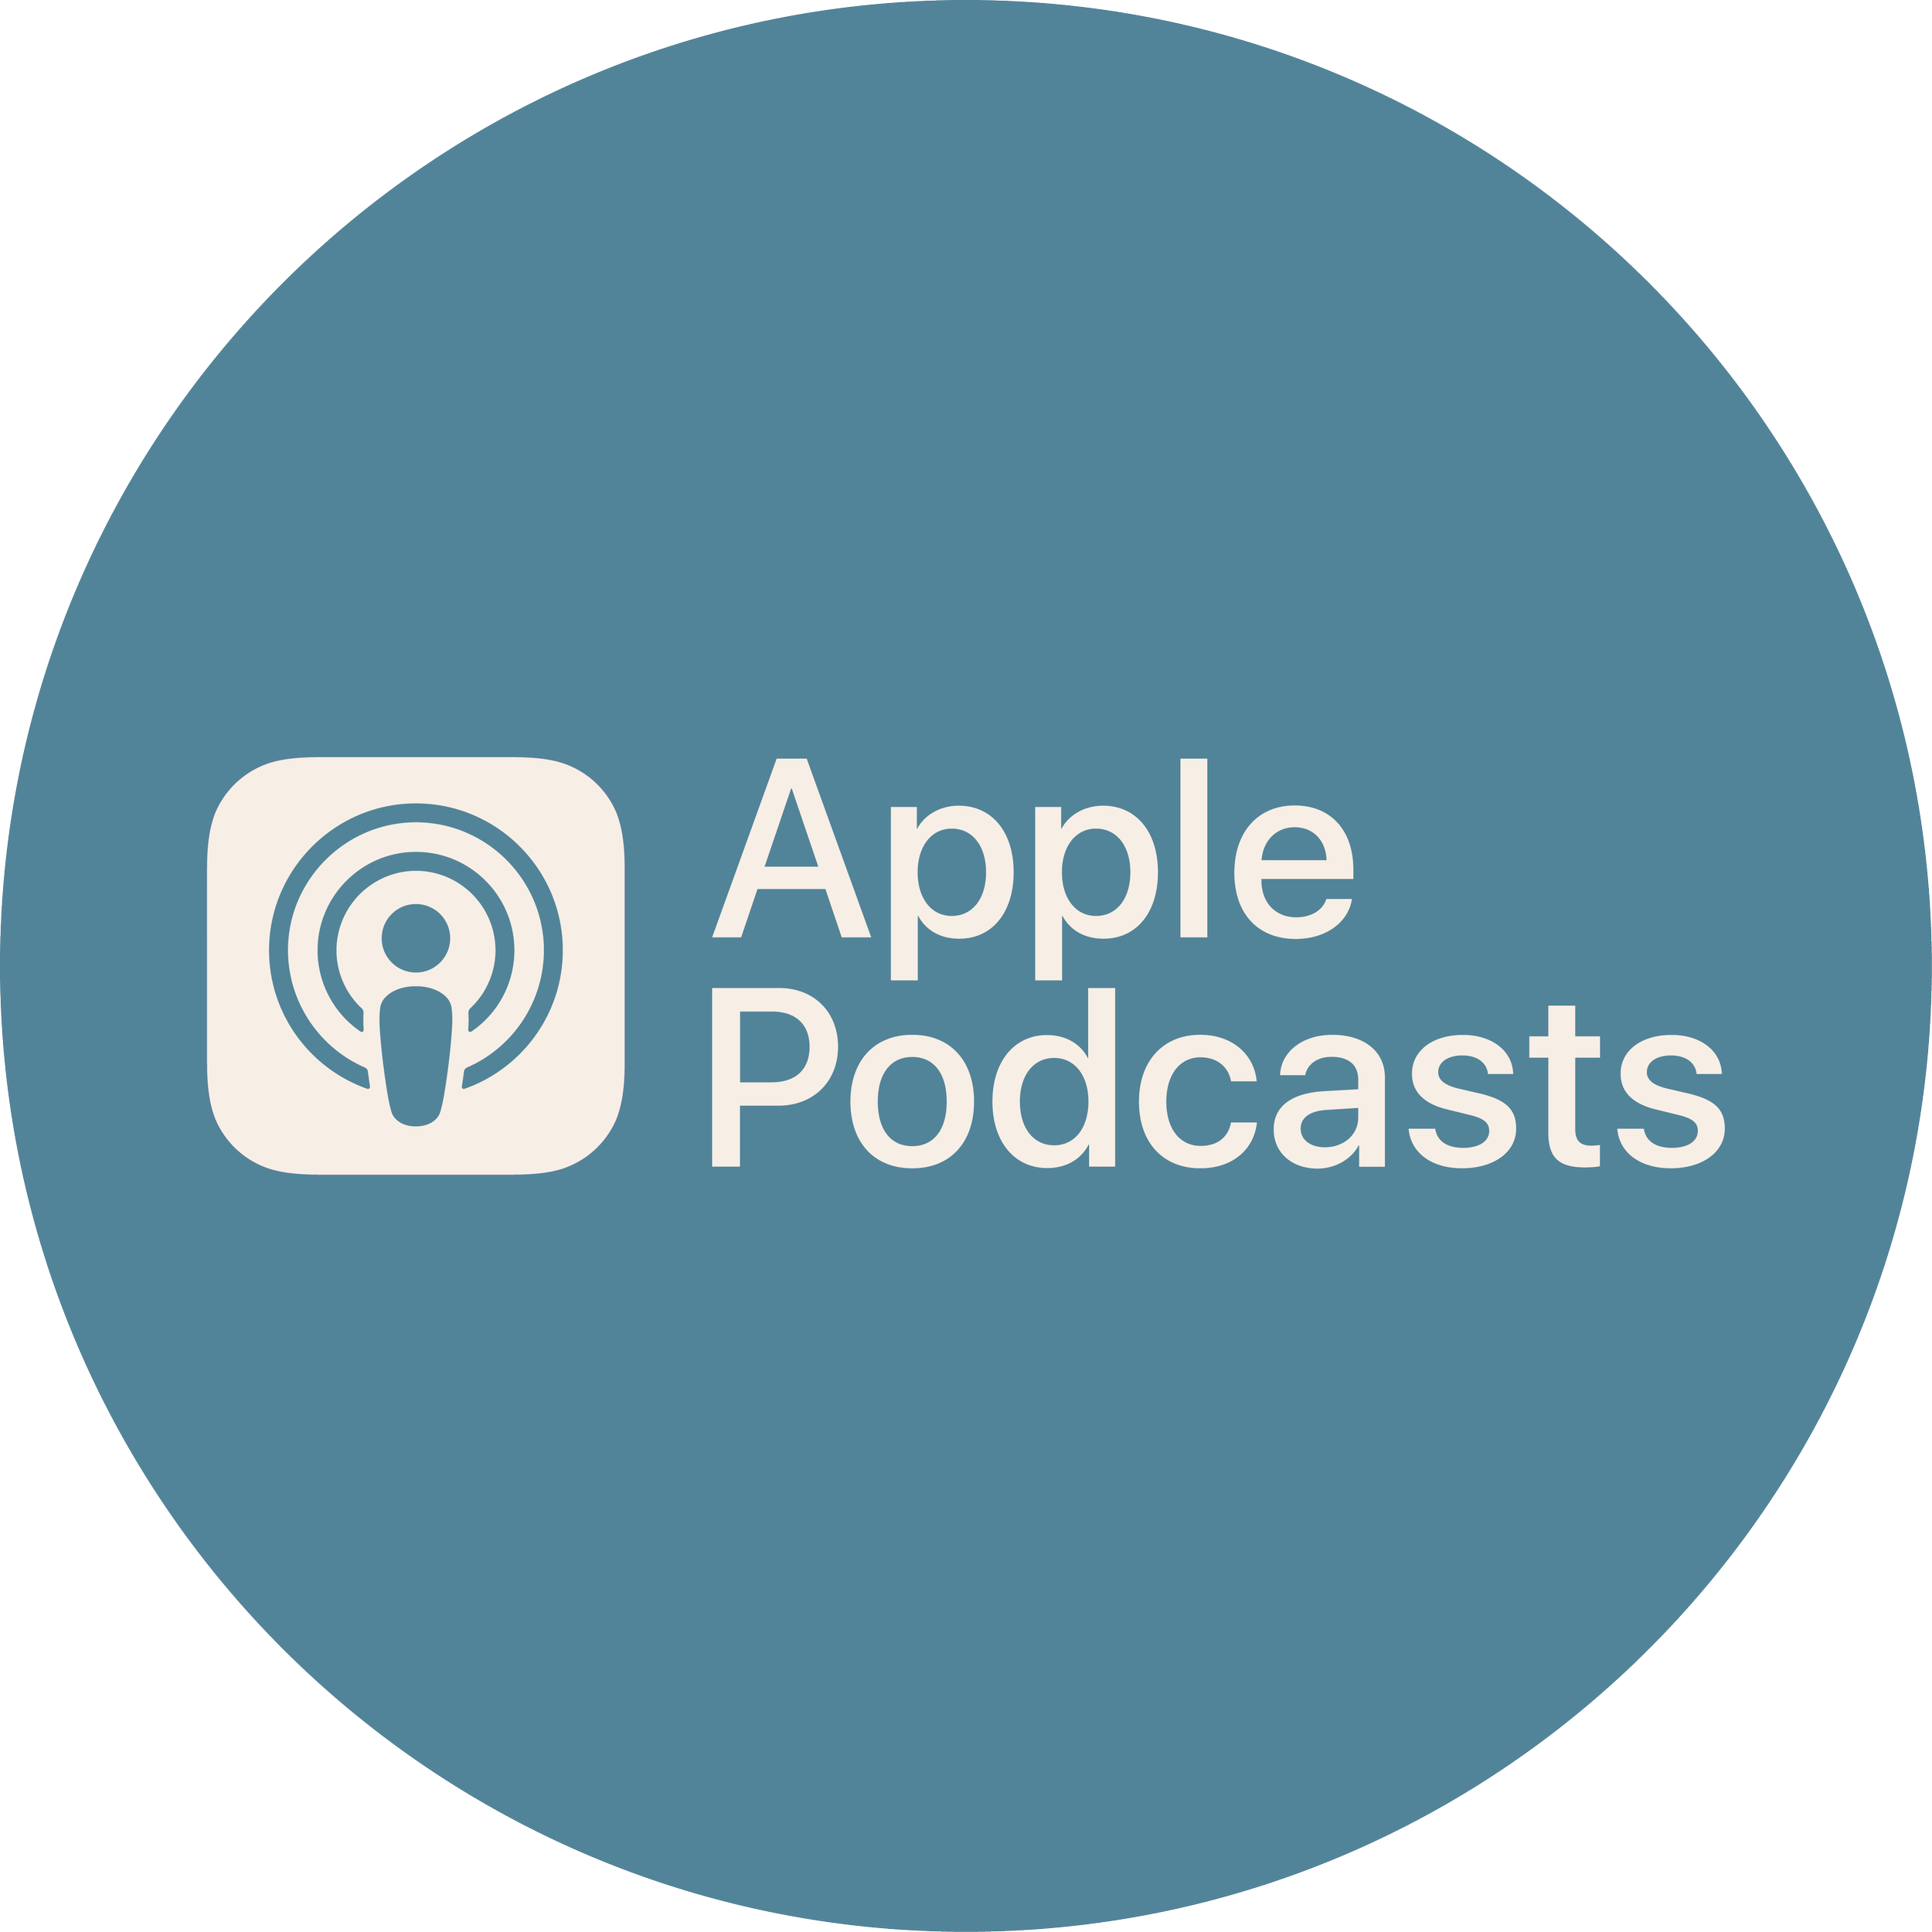 Podcast App Logos_Apple Podcast.png